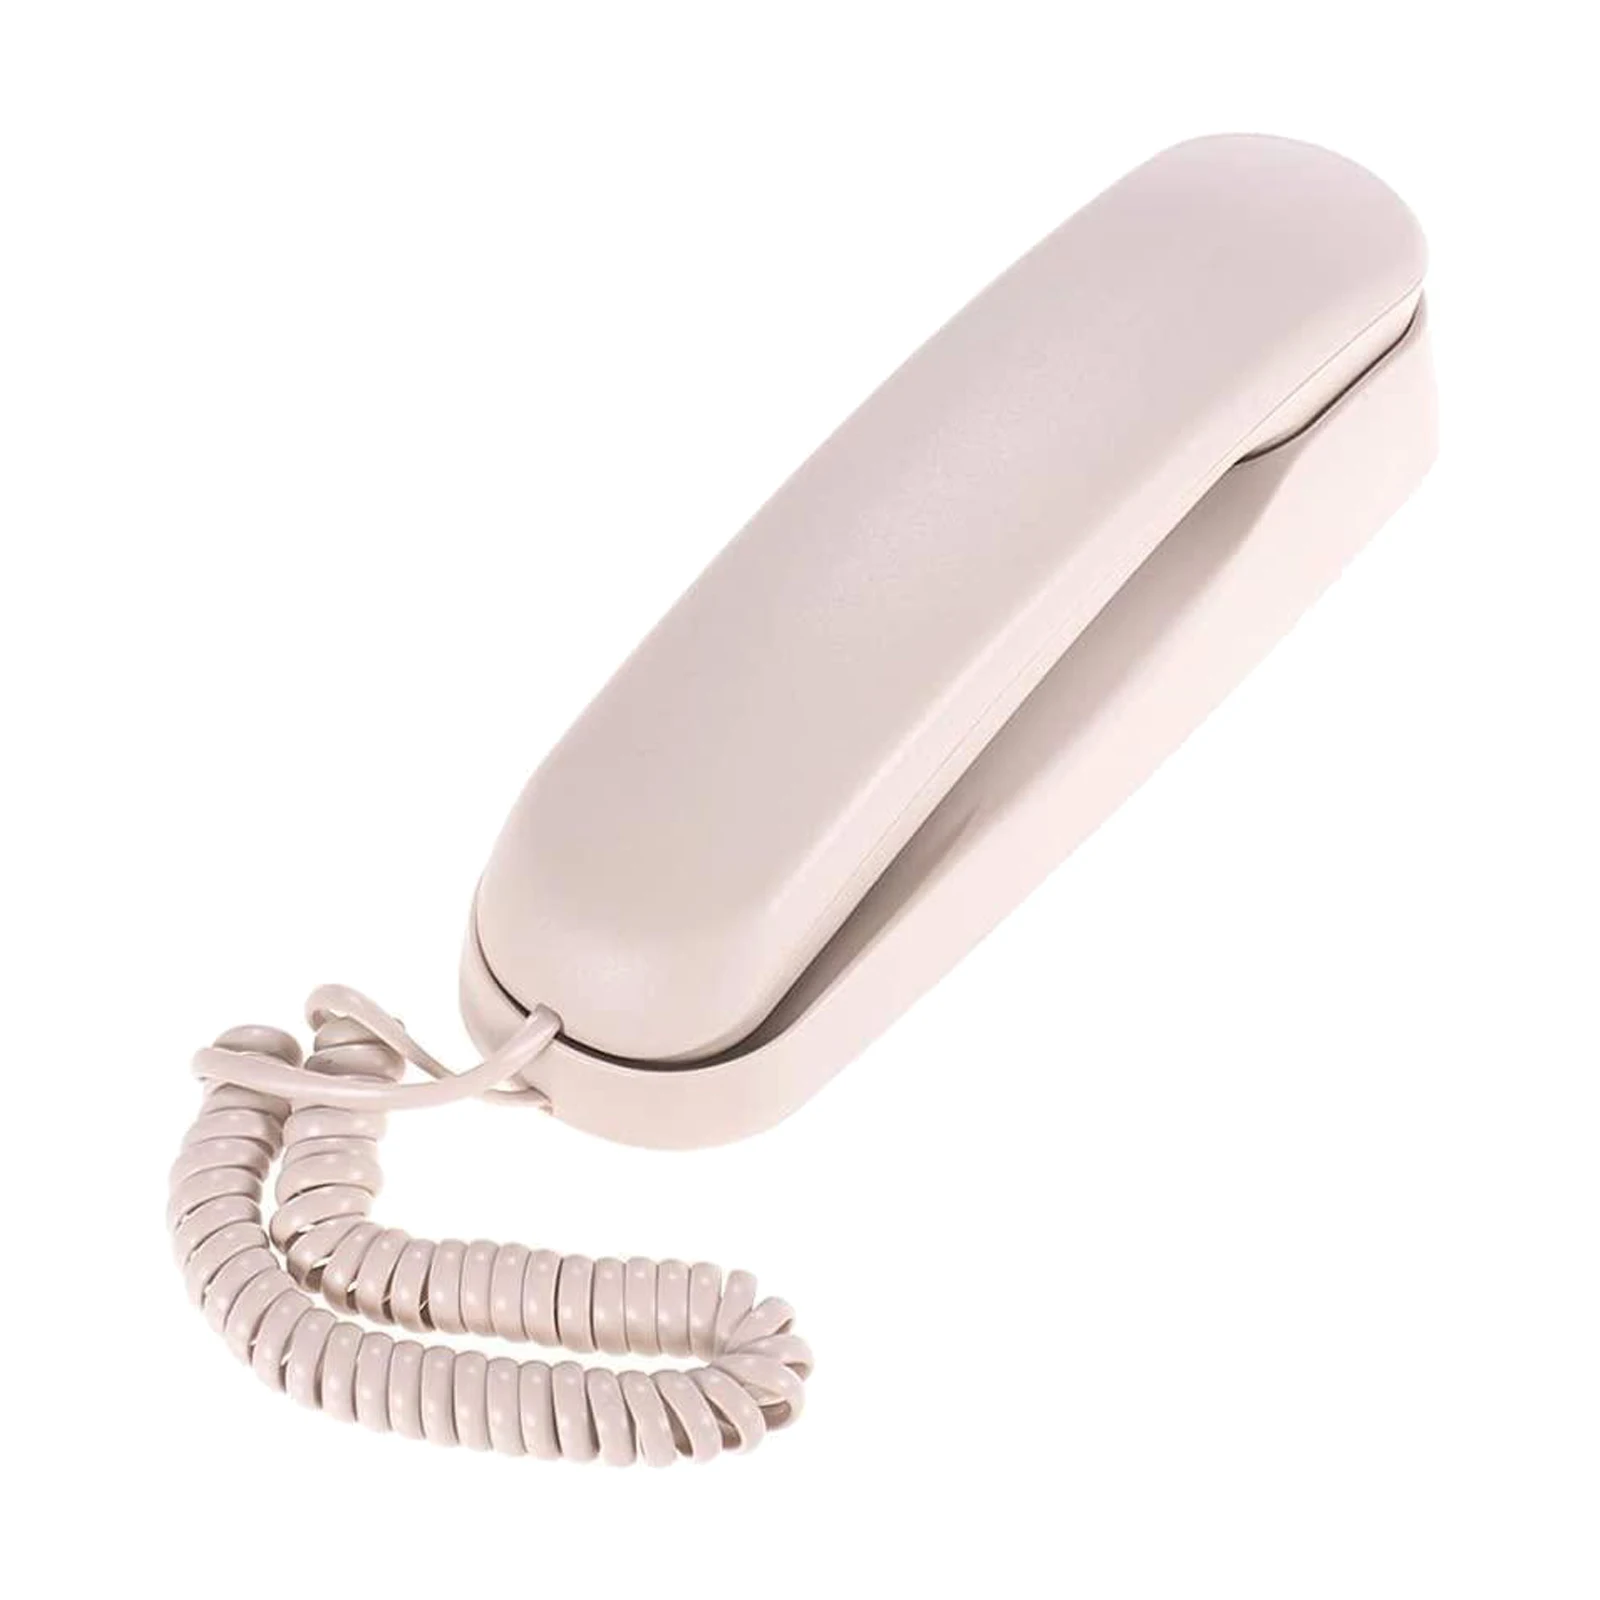 Mini Corded Home Office Telephone Landline Phone Flash/Redial Functions